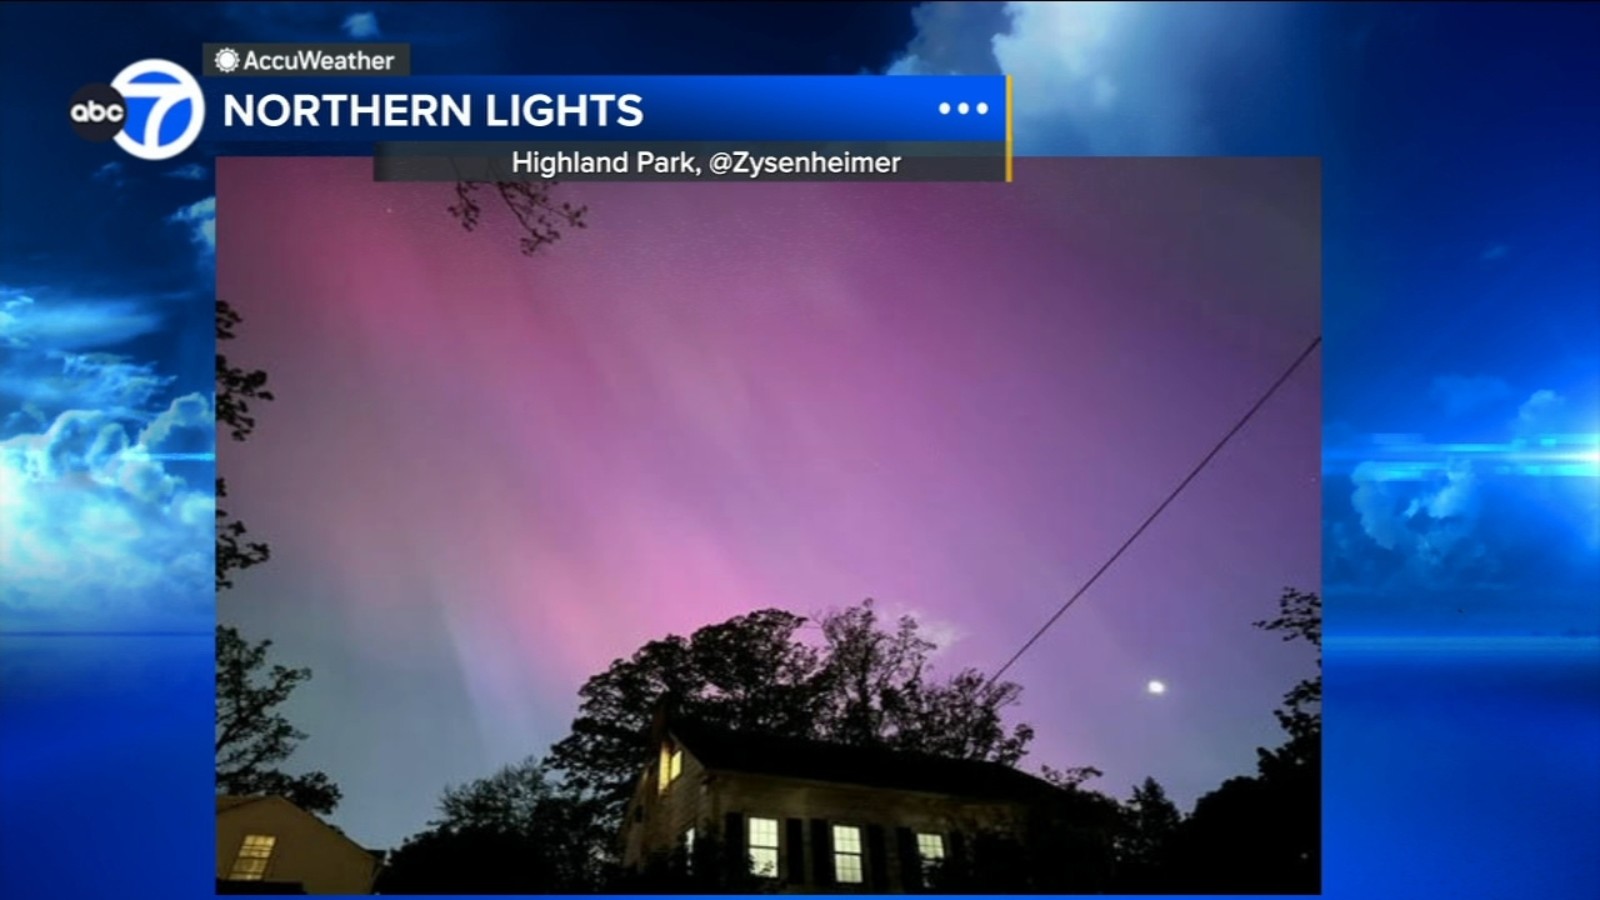 Northern Lights visible in parts of Chicago area on Friday due to strong solar storm